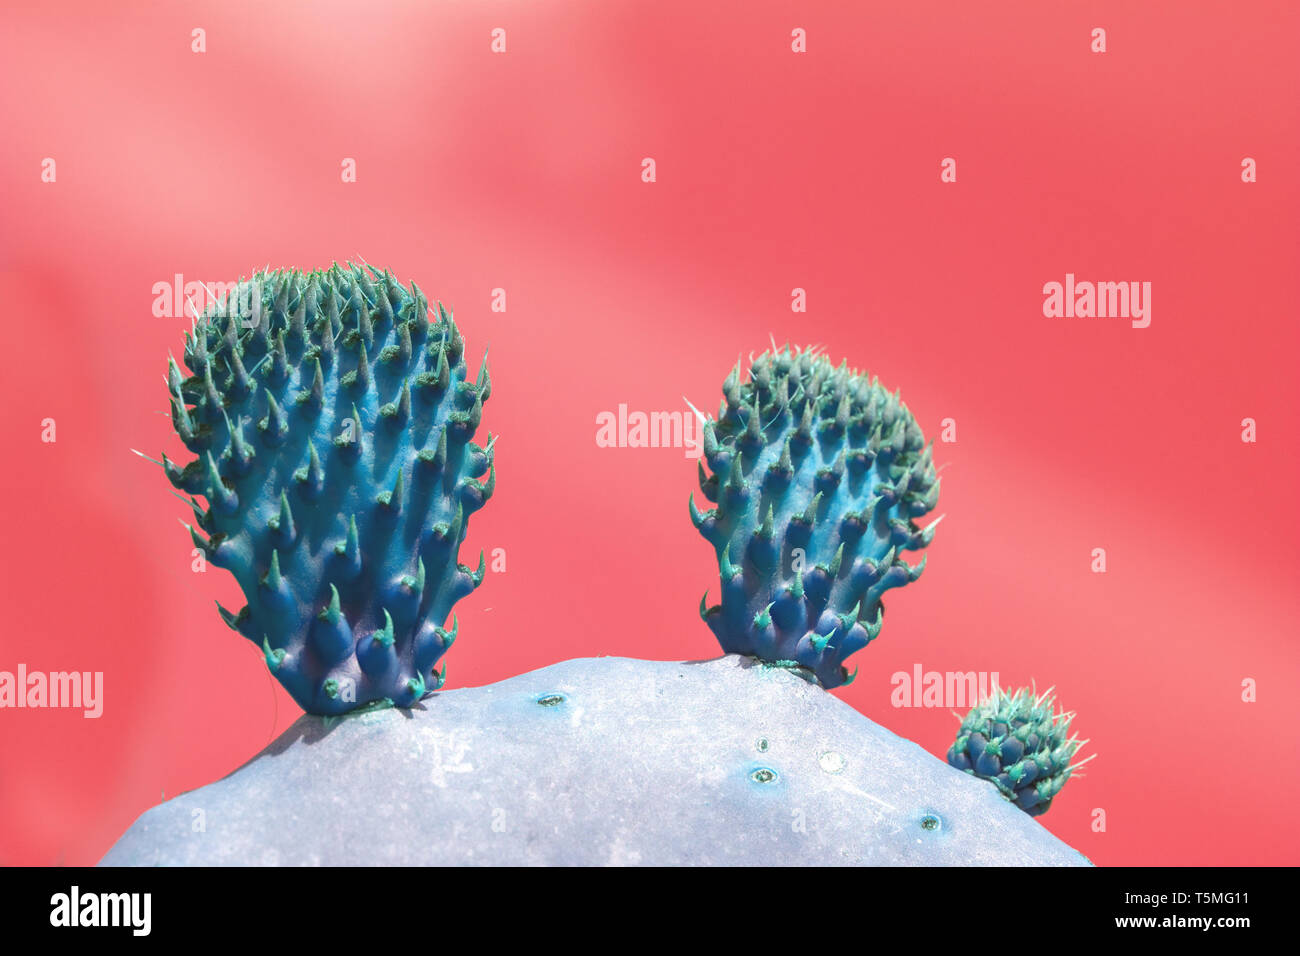 Surrealistic abstract blue thorny cactus with spikes and little fruits against pink orange sky Stock Photo